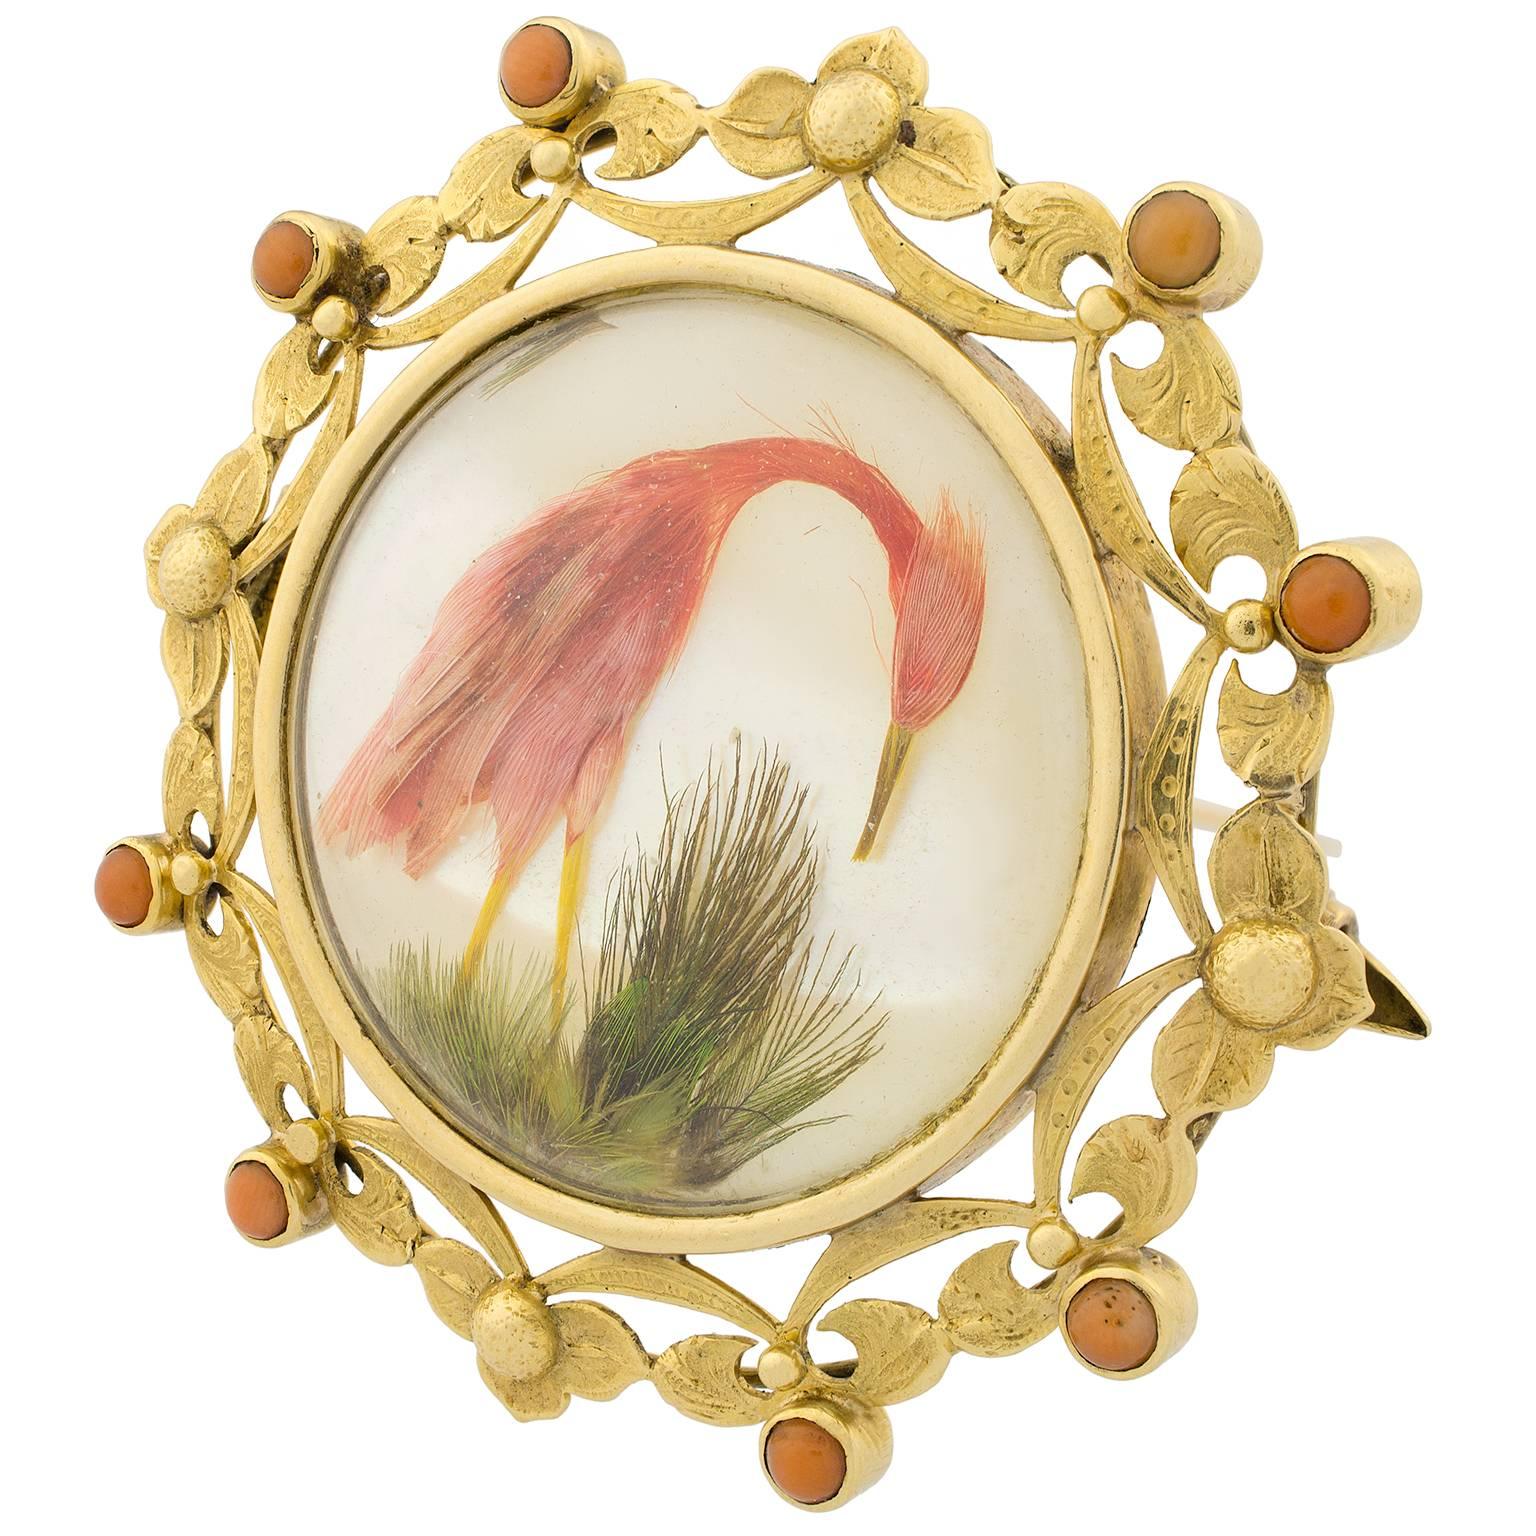 Victorian brooch in gold depicting a heron with details in coral, feathers and mother of pearl, inside a textured foliate frame.